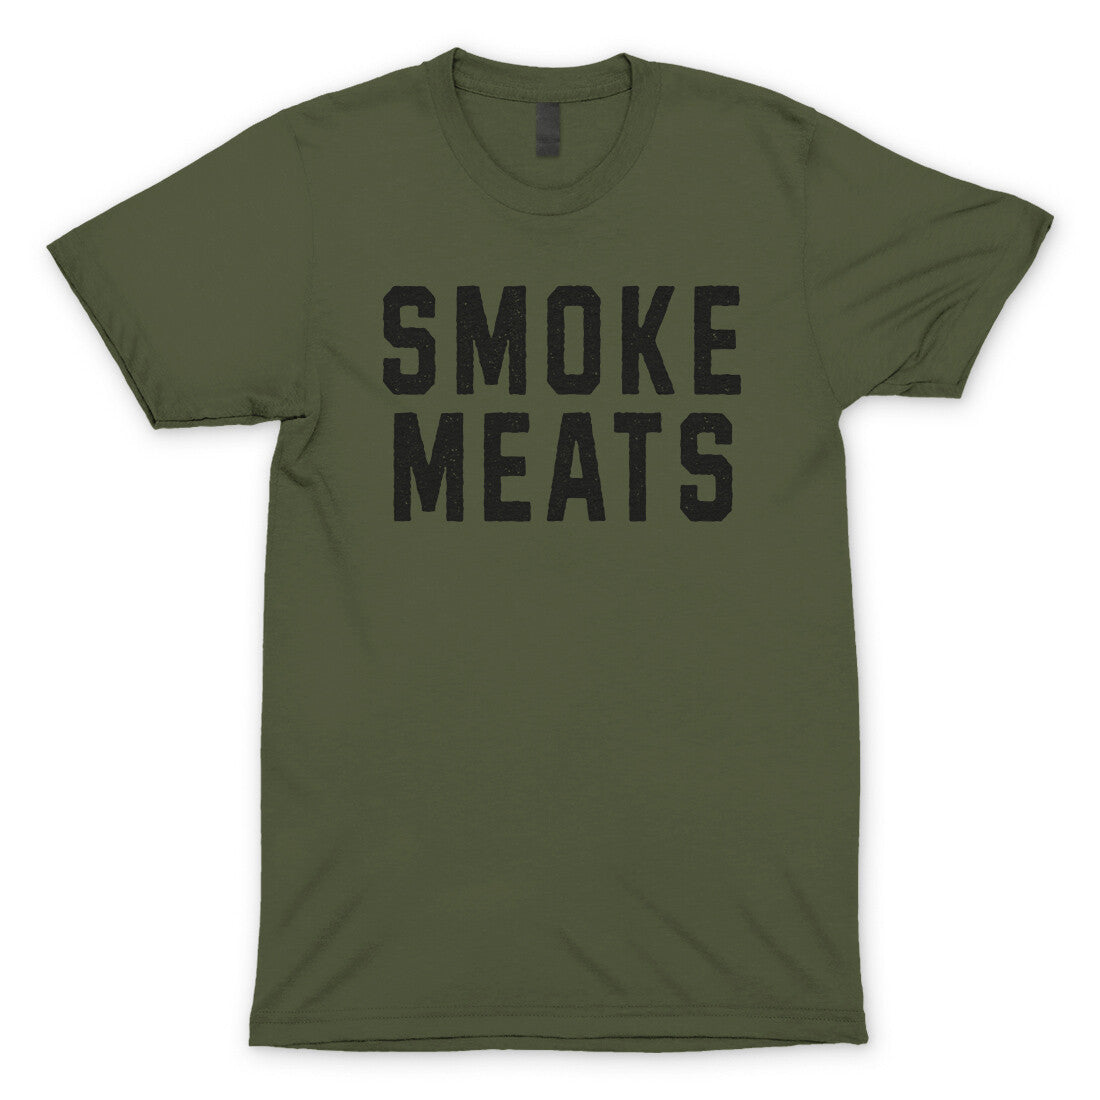 Smoke Meats in Military Green Color